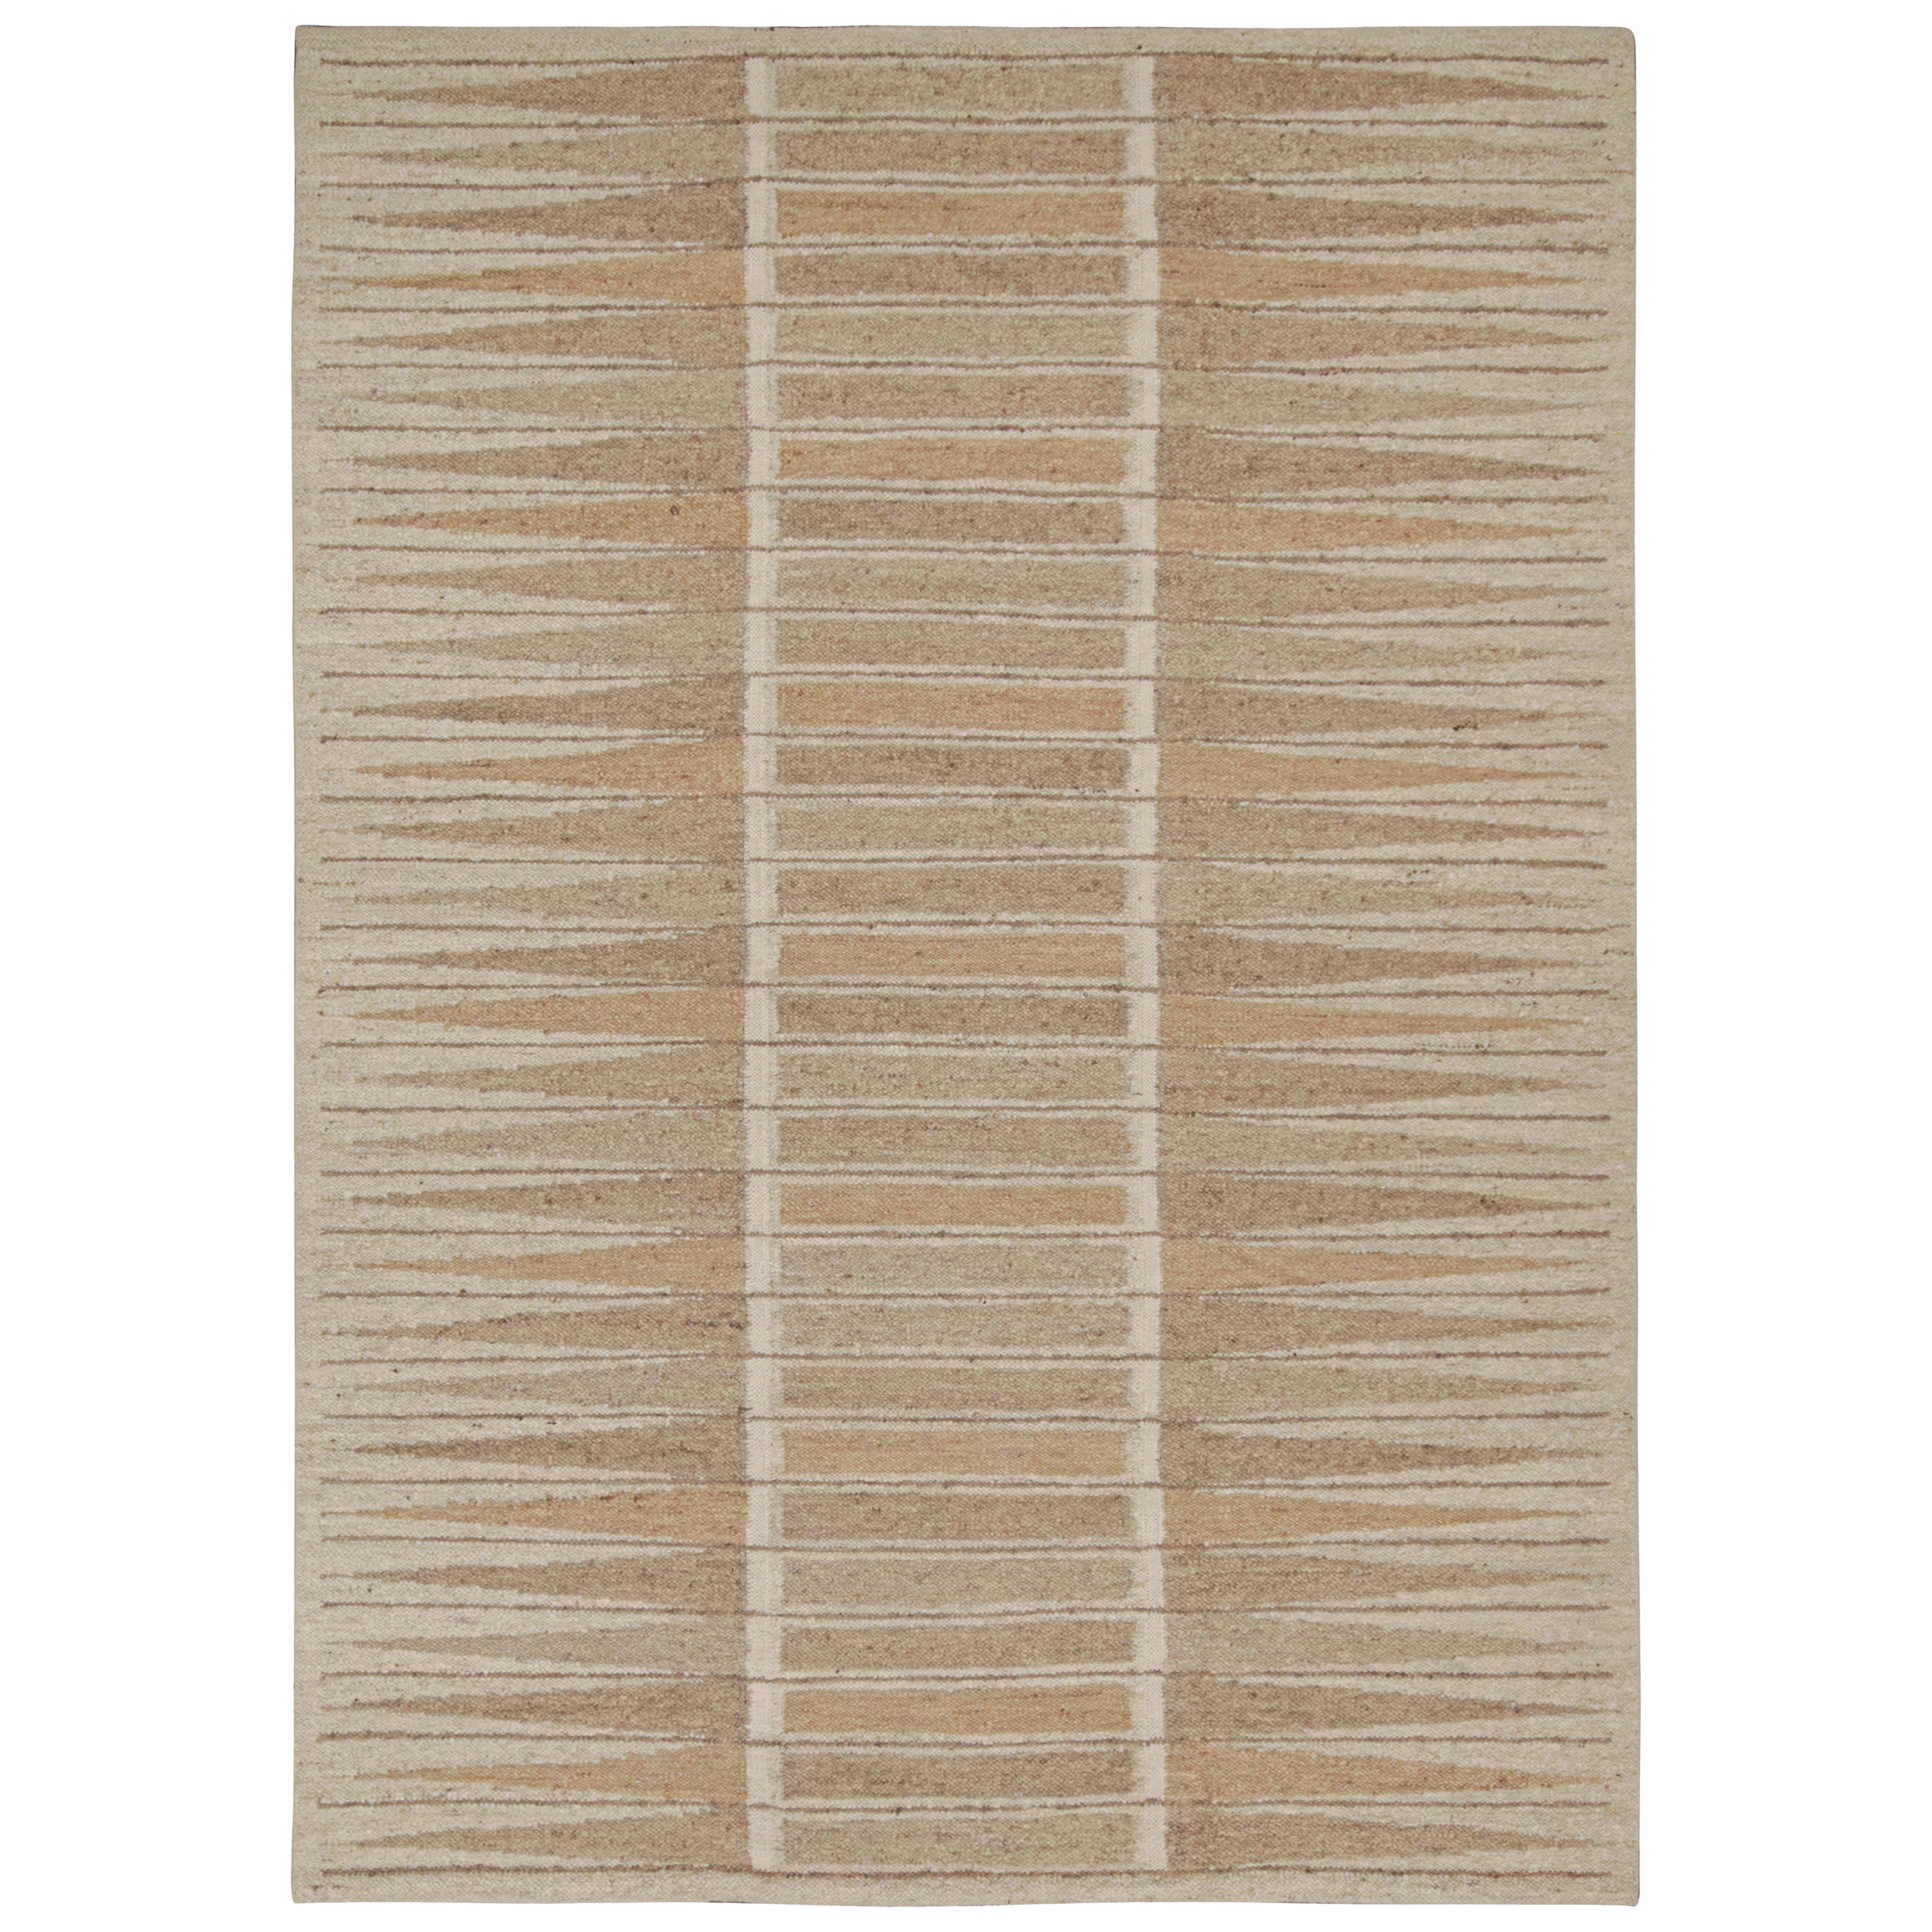 Rug & Kilim’s Scandinavian Style Kilim with Beige & Brown Geometric Patterns For Sale